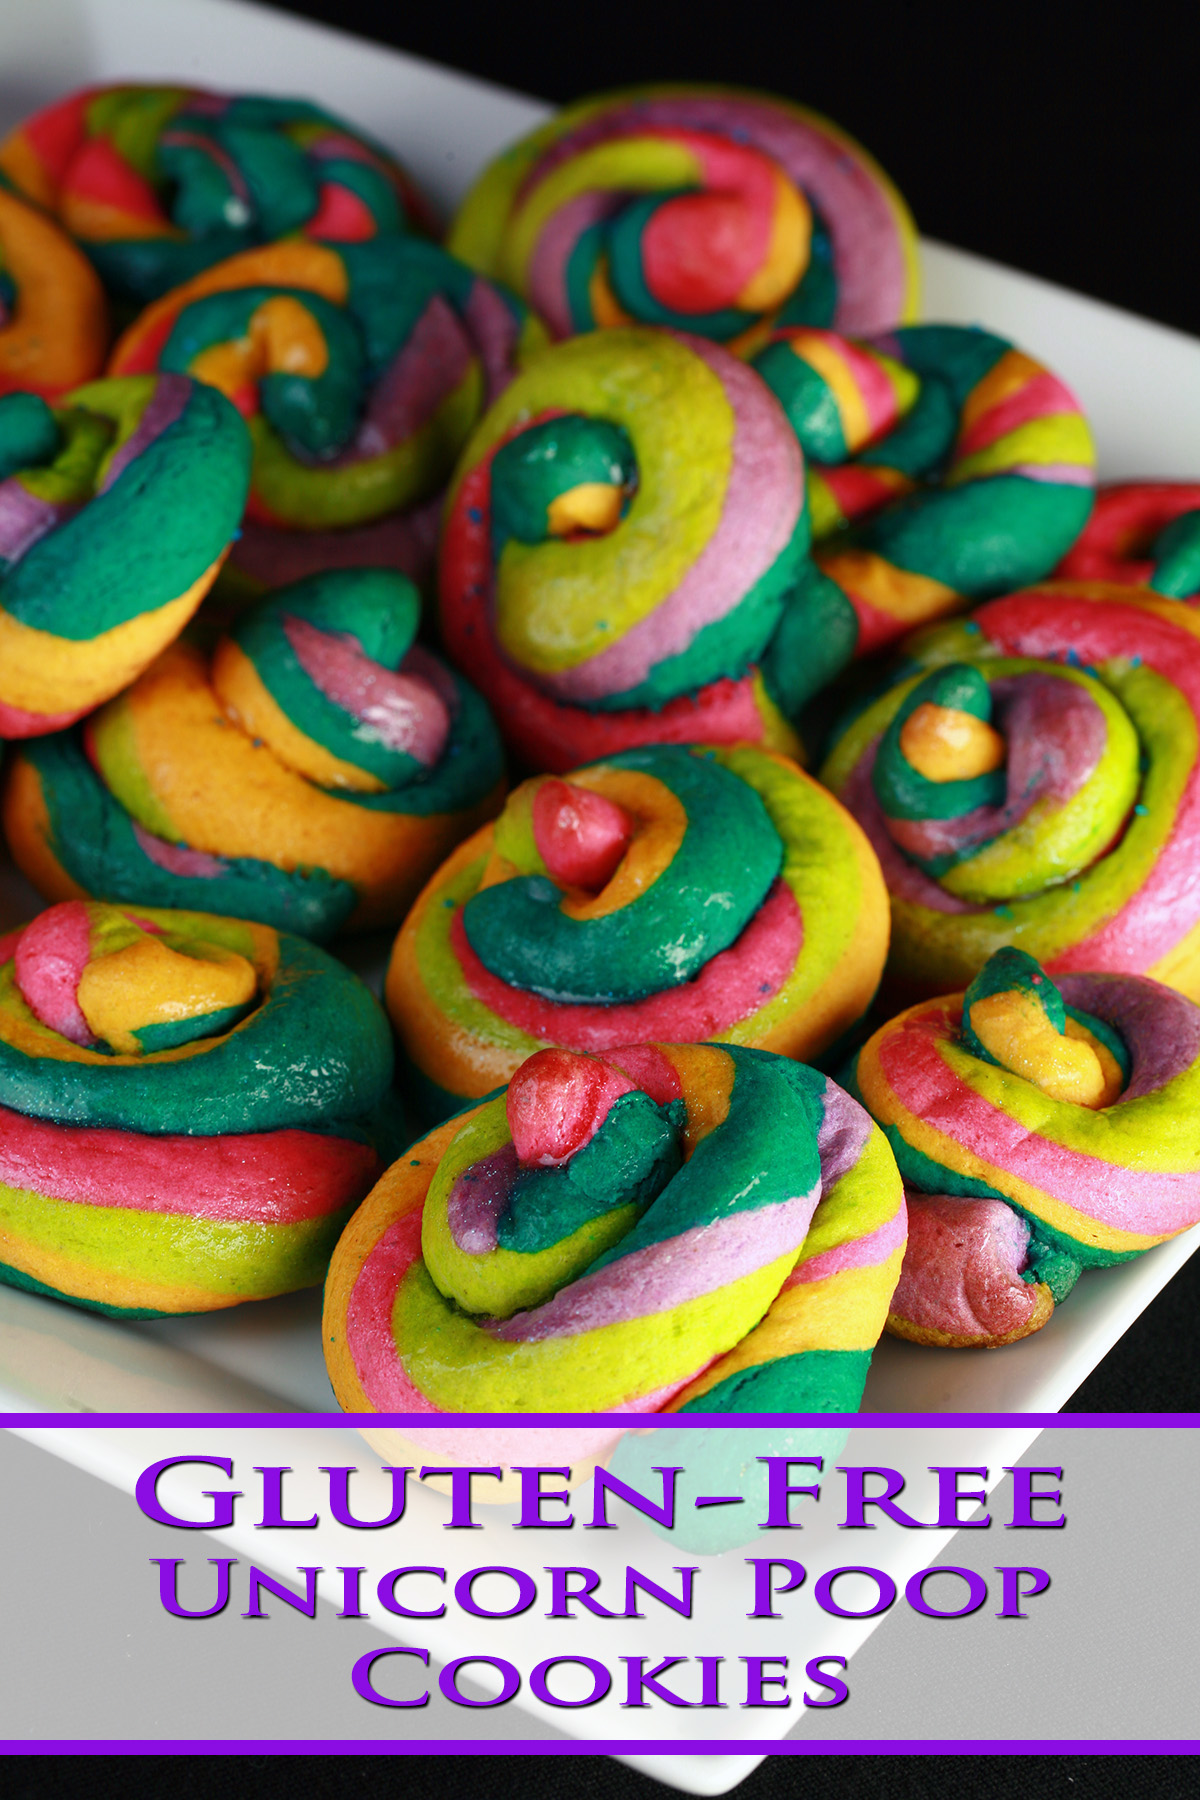 A close up view of a pile of gluten-free unicorn poop cookies.  They are brightly coloured cookie poops made from brightly coloured twists of cookie dough.